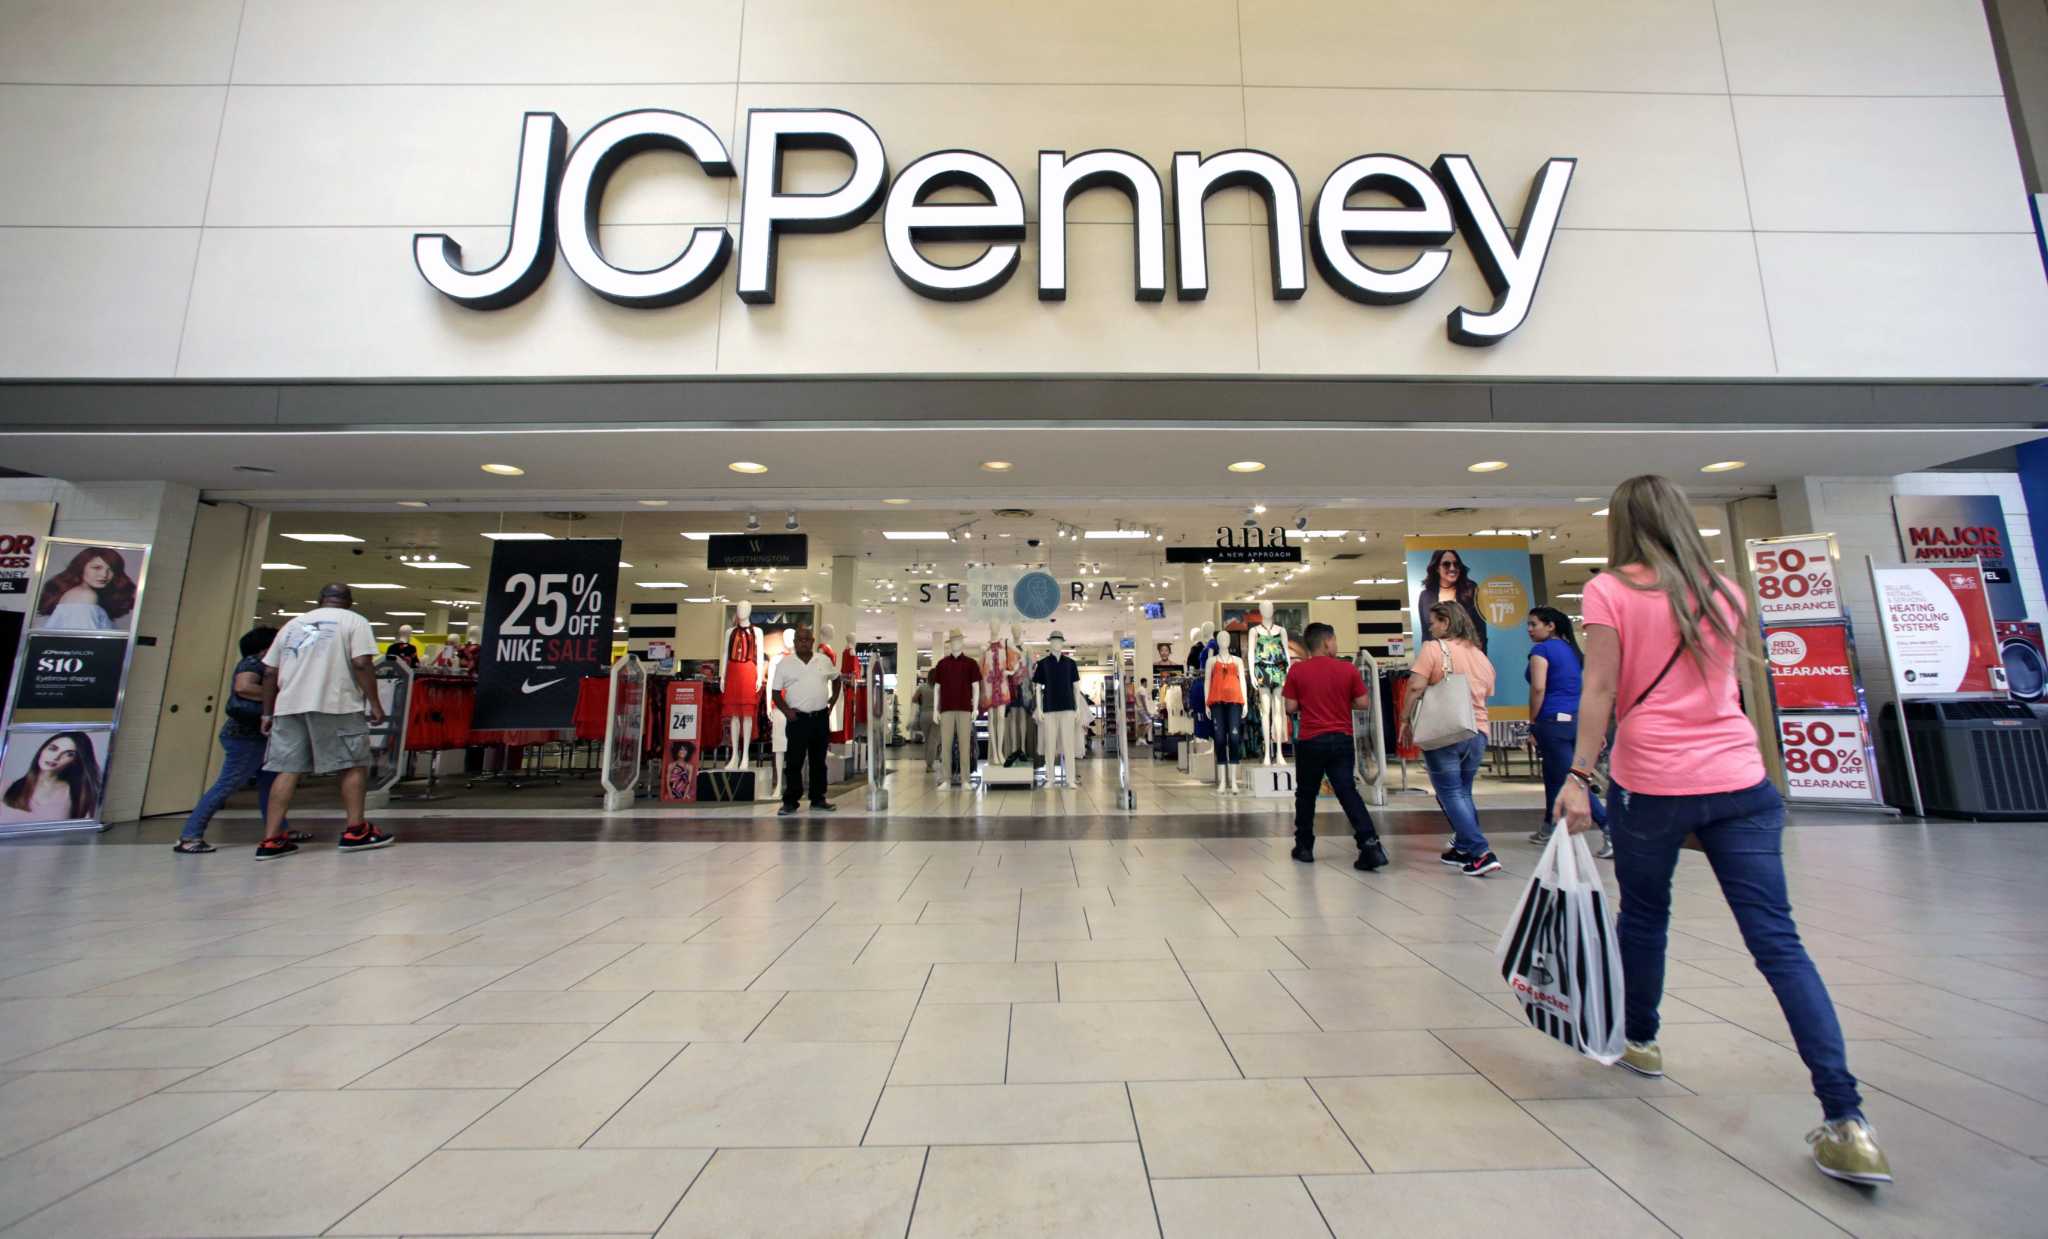 JCPenney aims to double the size of its staff in the Houston area by hiring...